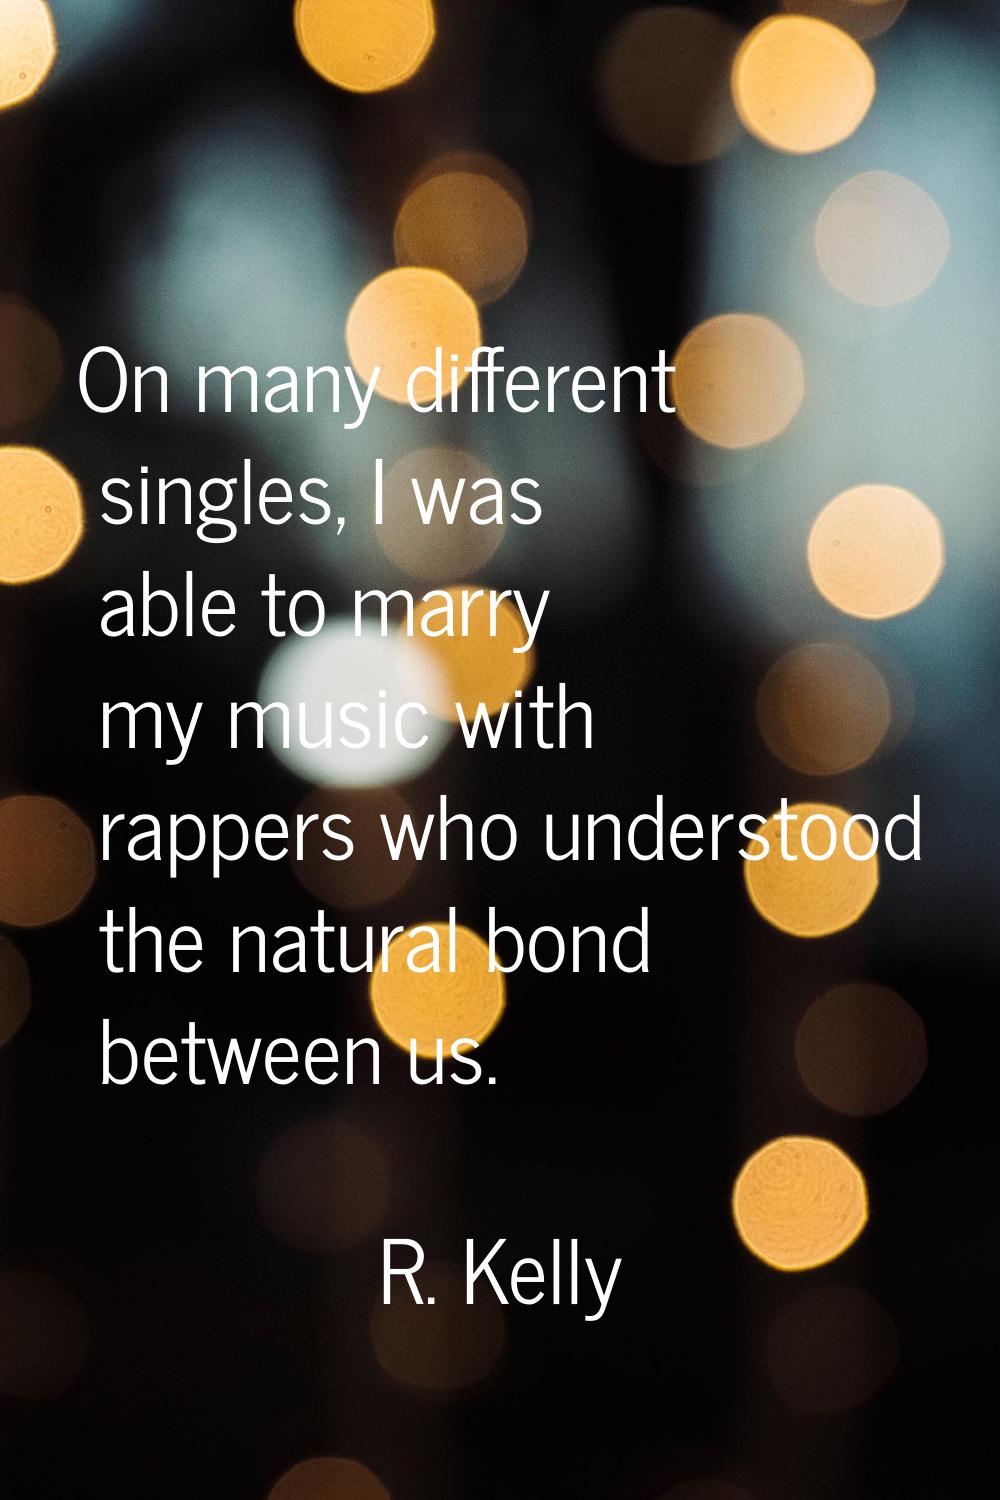 On many different singles, I was able to marry my music with rappers who understood the natural bon